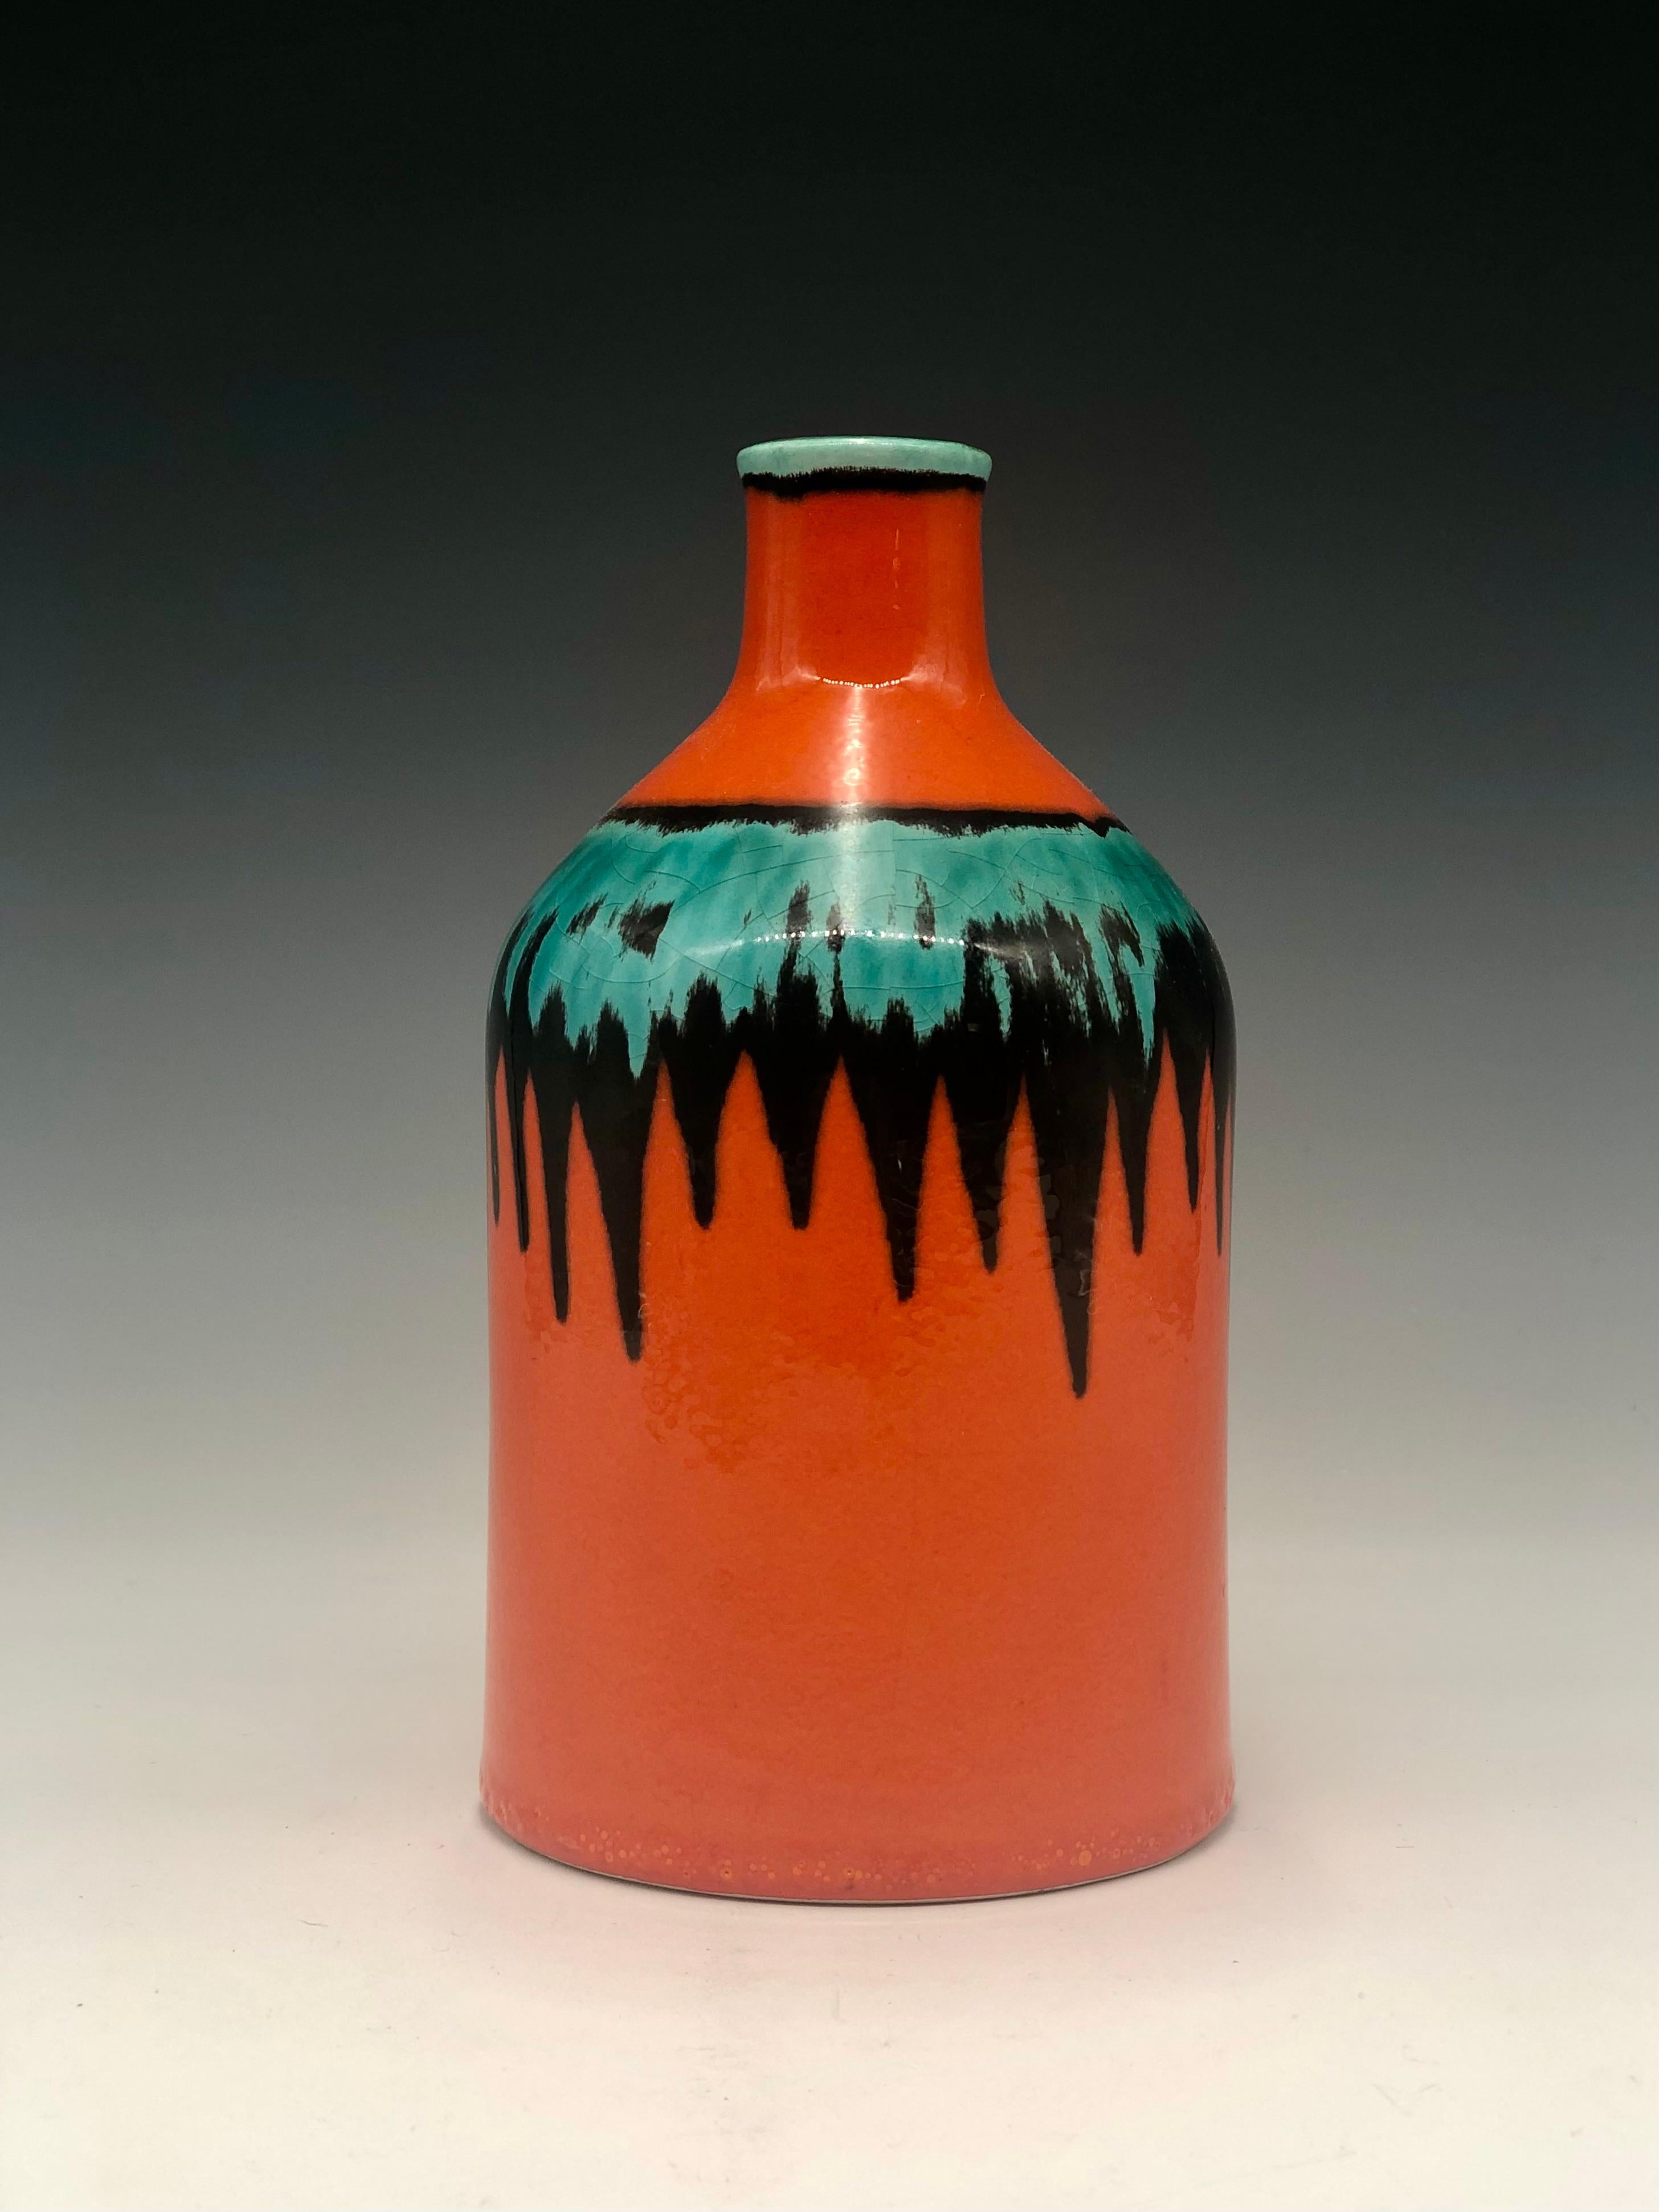 Bright, boldly colored orange, black, and aqua green mid-century vase by Cortendorf. A beautiful, bold example of West German Art Pottery from the 1950s. It has its original maker's label, 